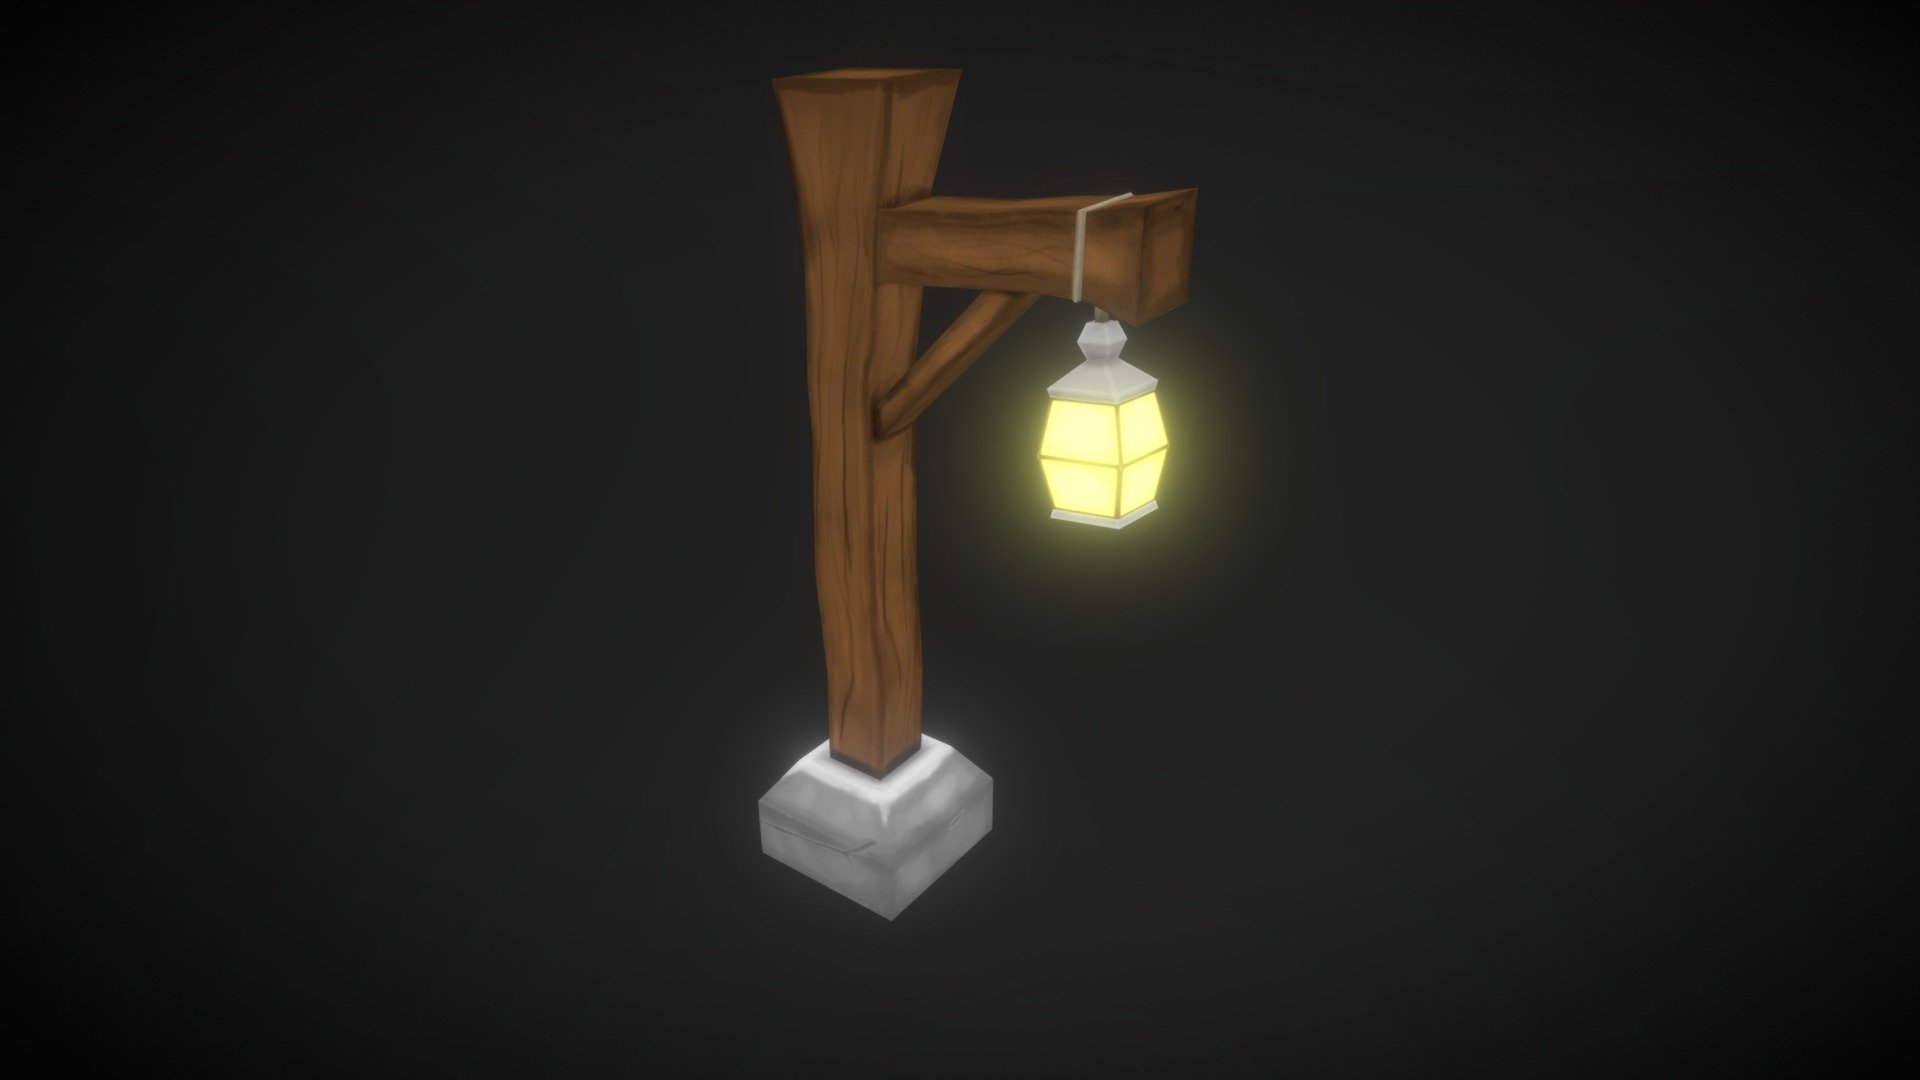 Old Lantern

This Lantern is created for games:
* Has low poly count.
* Handpainted textures.

It also comes with an Animation:
* Lantern swings a little bit - Old Lantern [GameAsset/Animated] - Download Free 3D model by BlackAlesel 3d model